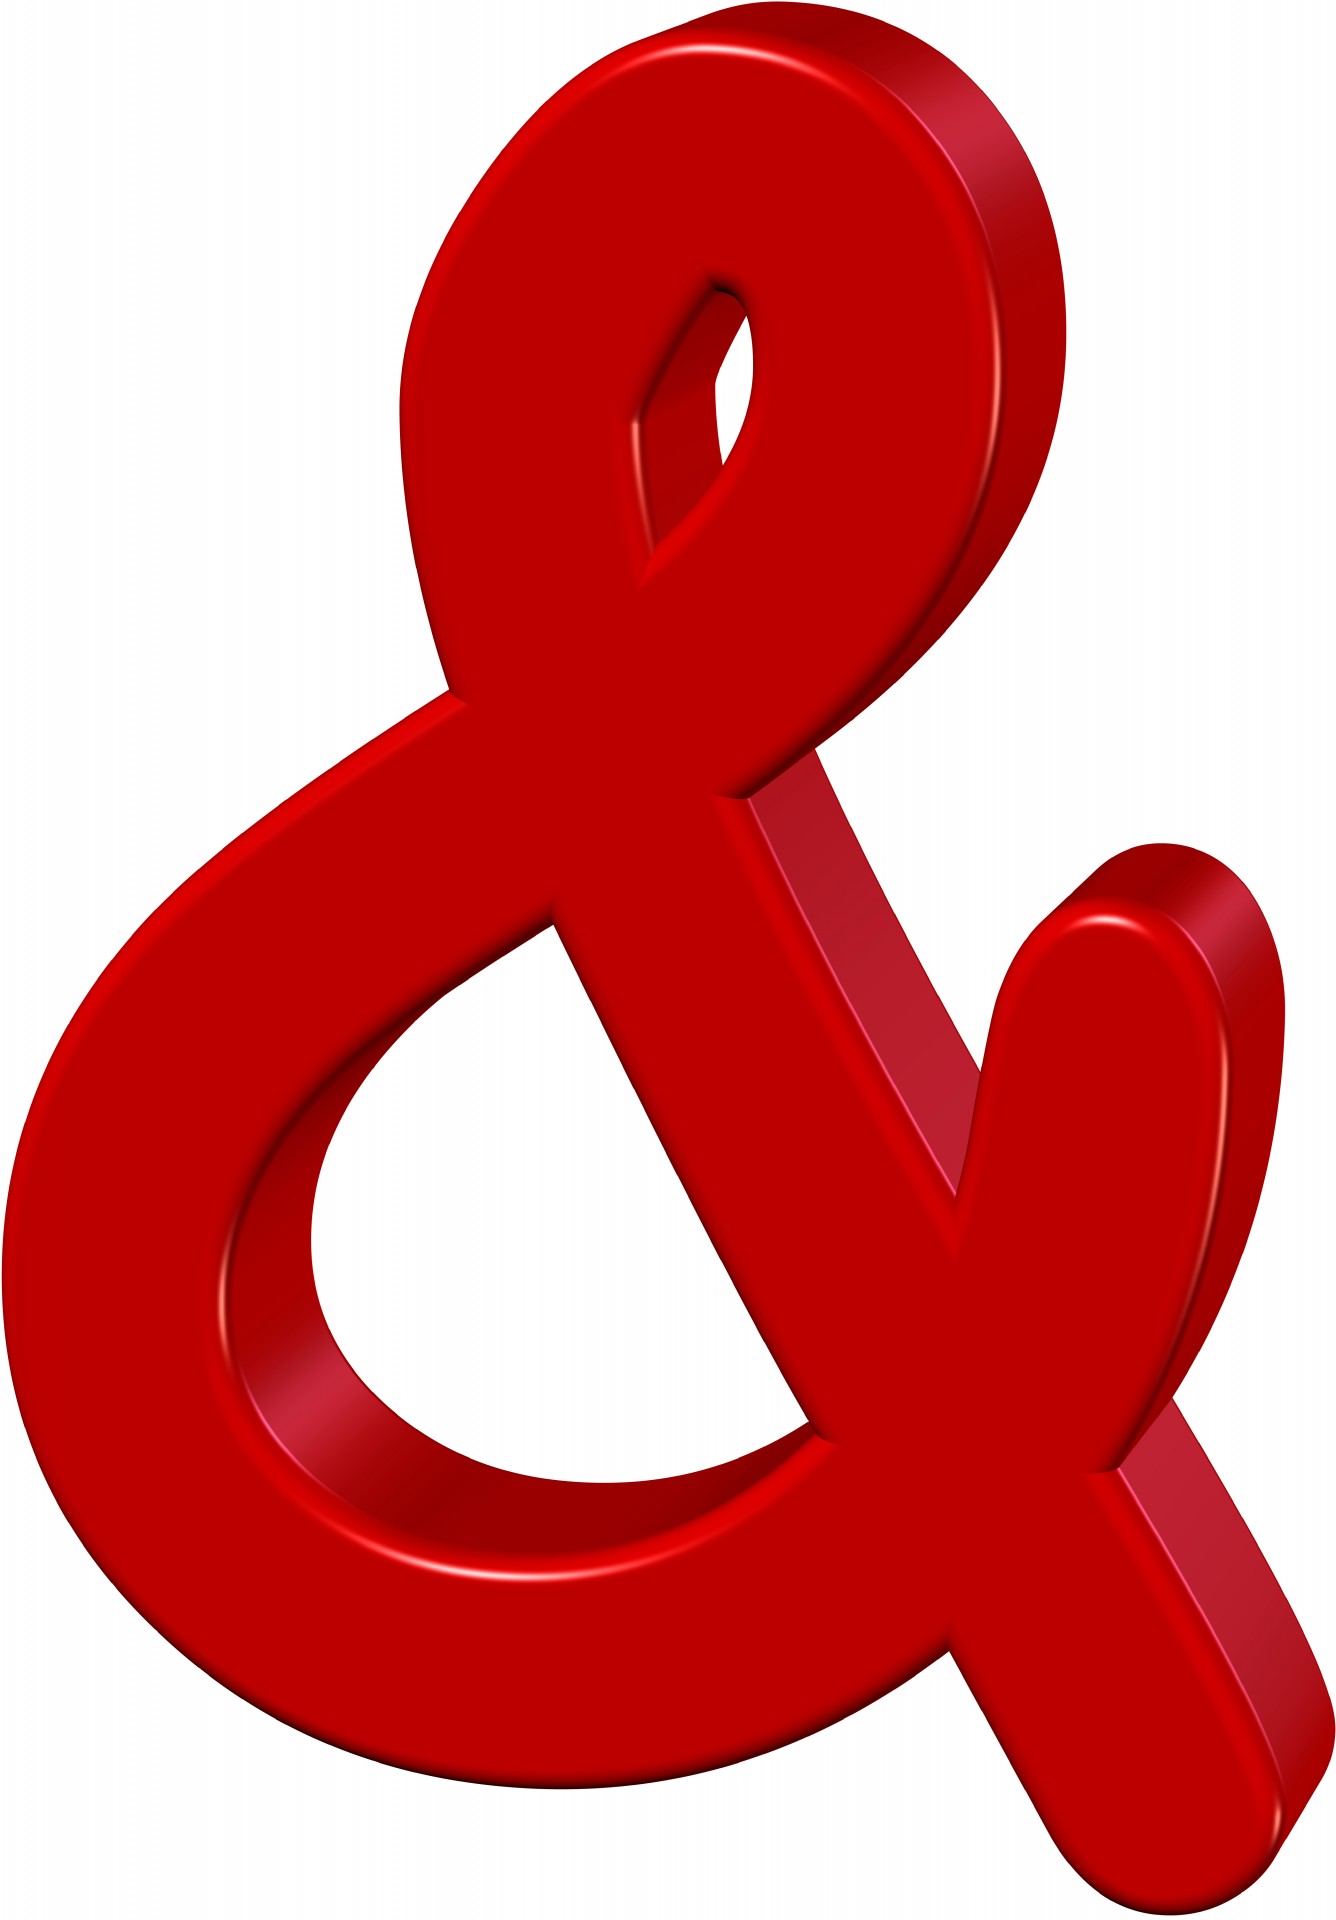 ampersand font sign free photo